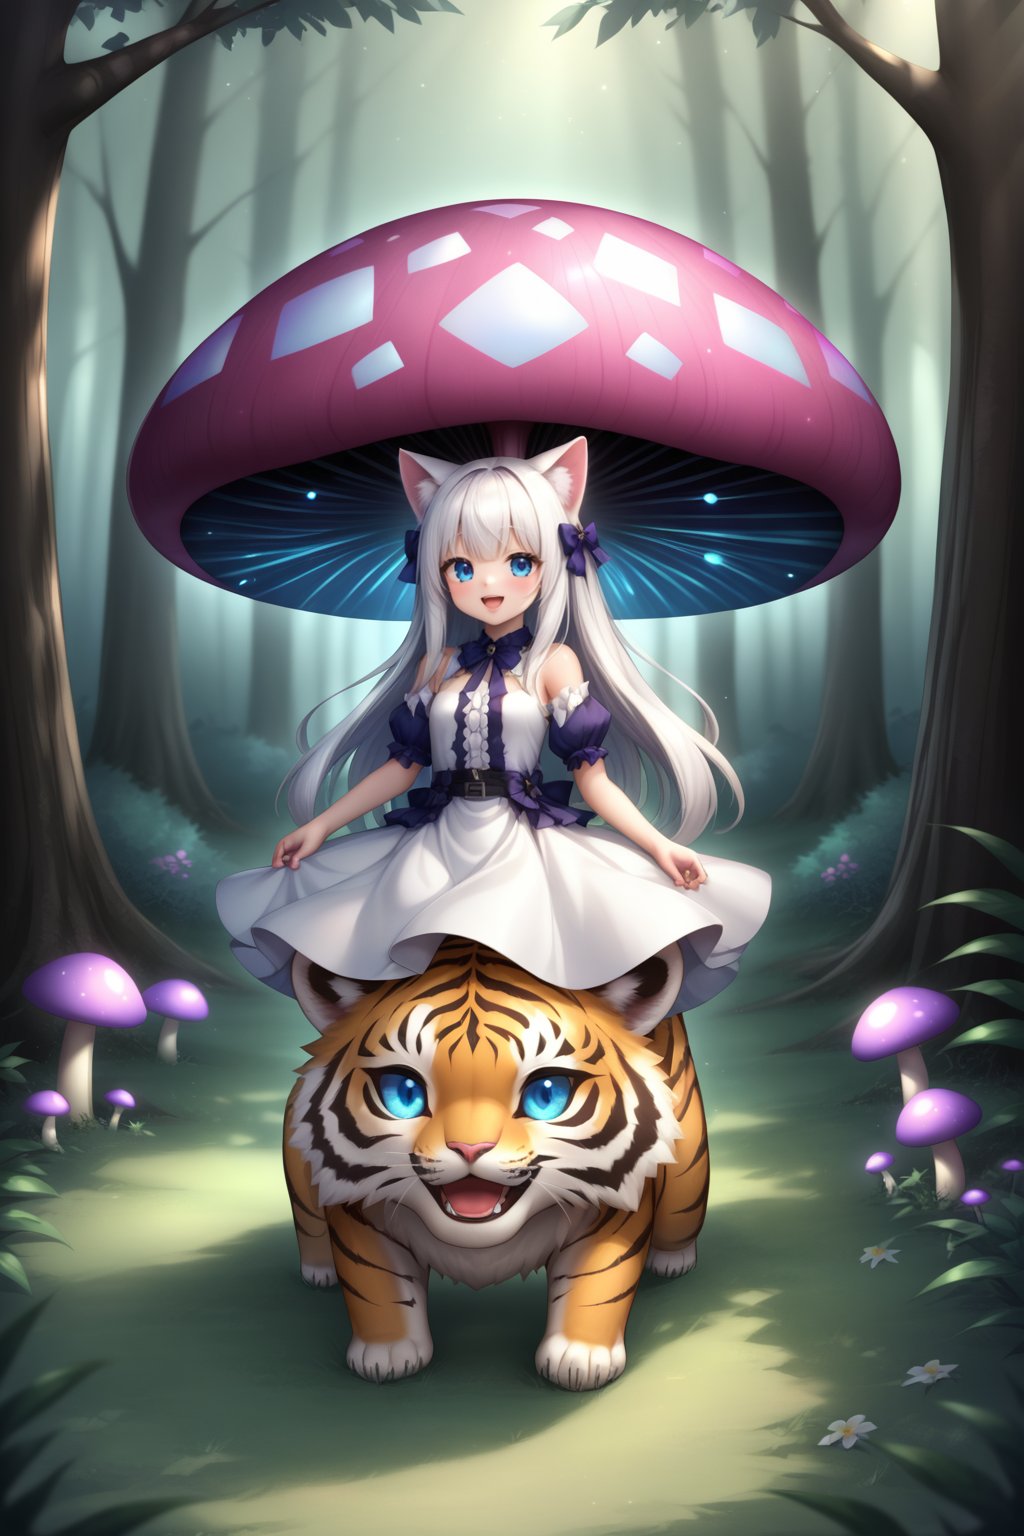 bad cat girl|
a young anime girl with Japanese features|
long white hair|
blue eye lenses|
smiling expression|
a gothic white dress and white heels|
riding on a tiger|
At midnight|
Japanese style|
Glowing Mushroom Forest| 
glow and bioluminescence|
full body,